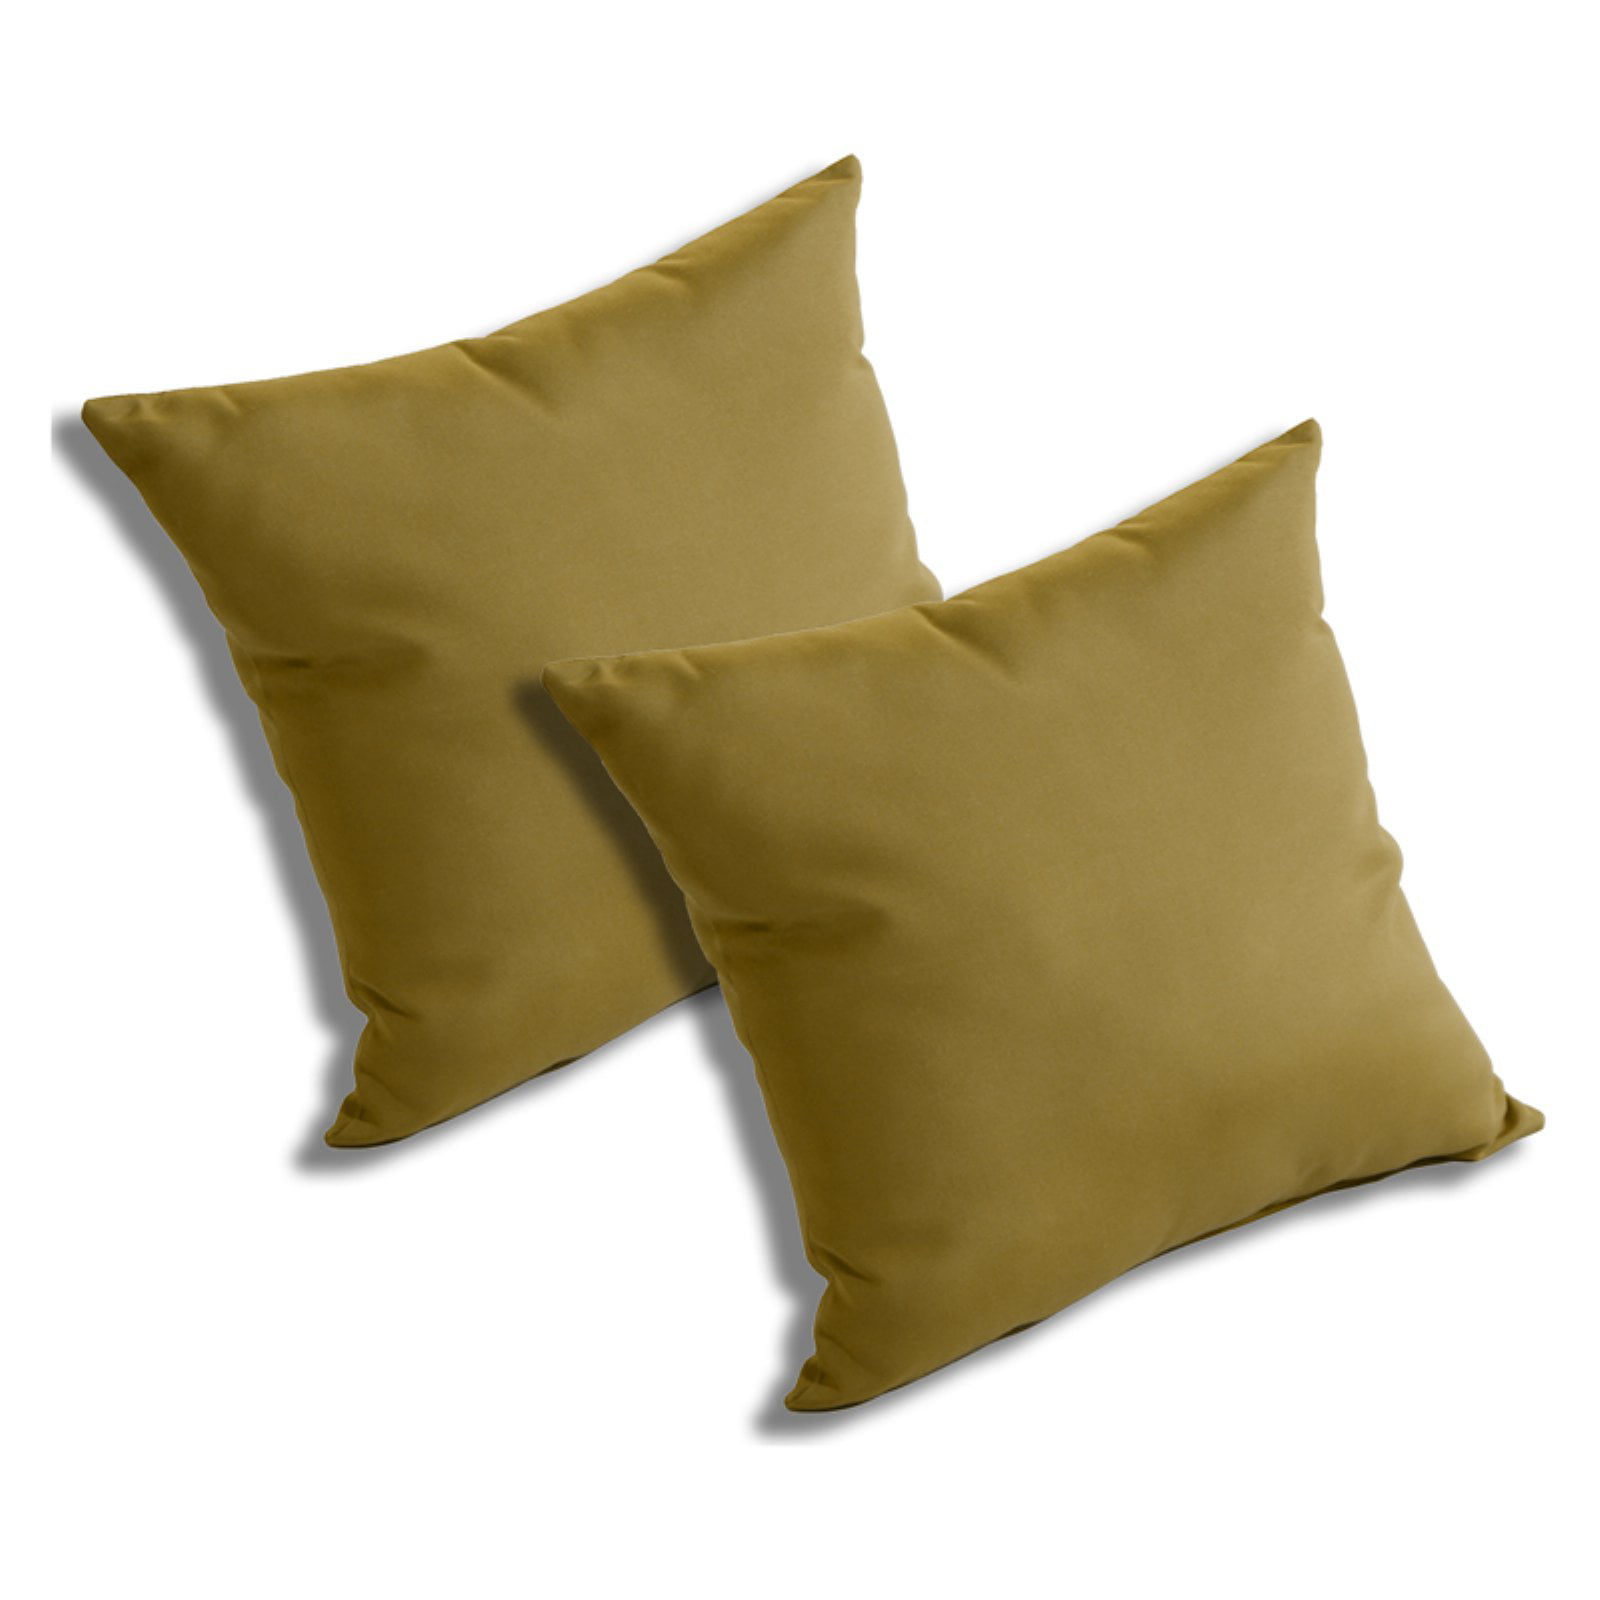 Sunbrella Canvas Buttercup Indoor/outdoor Decorative throw pillow with Pillow Insert Made to Order